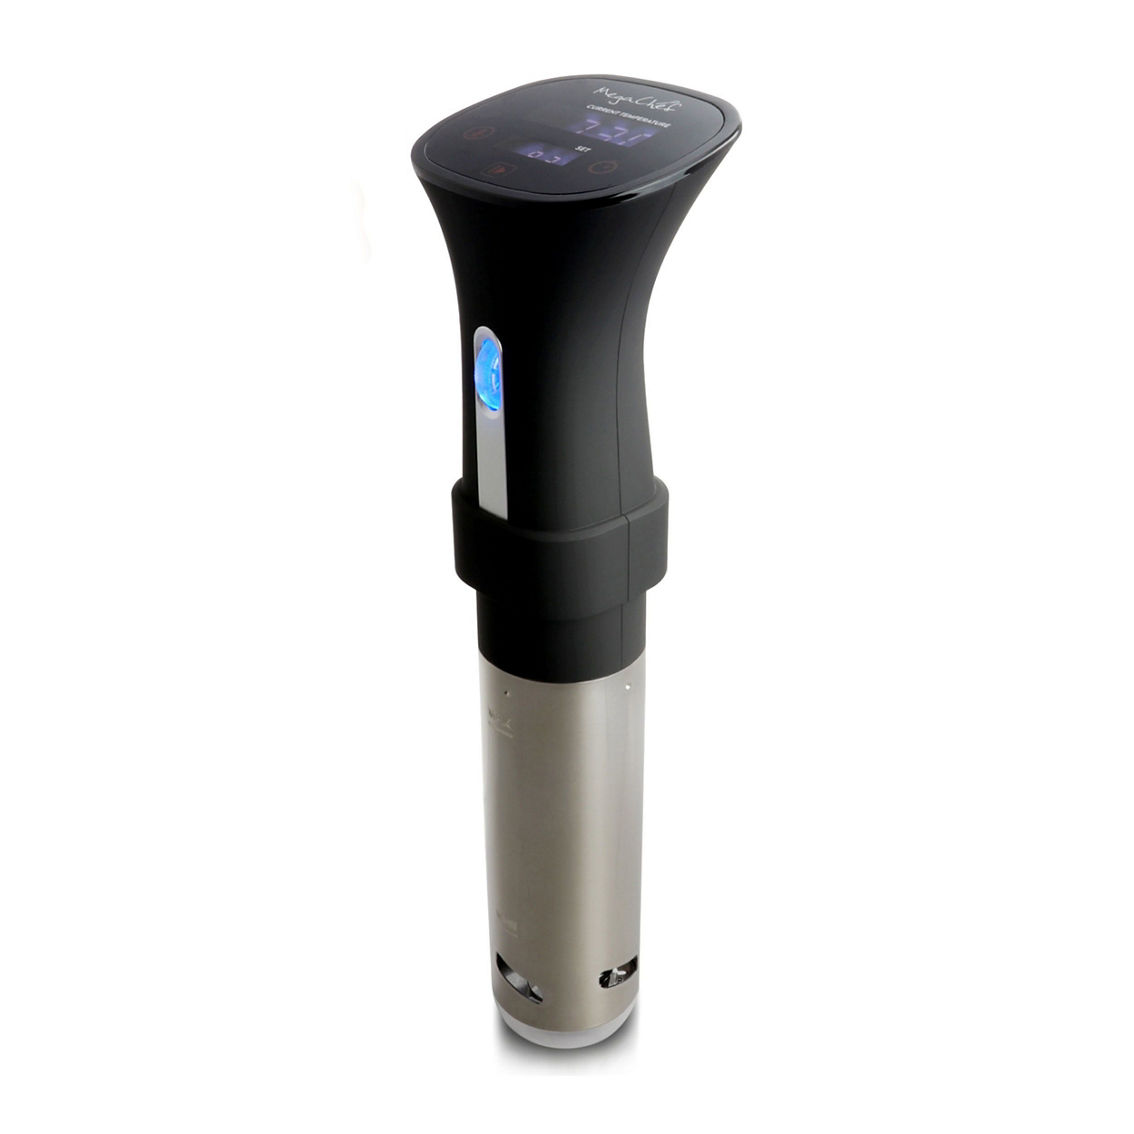 MegaChef Immersion Circulation Precision Sous-Vide Cooker With Digital Touchscre - Image 3 of 5